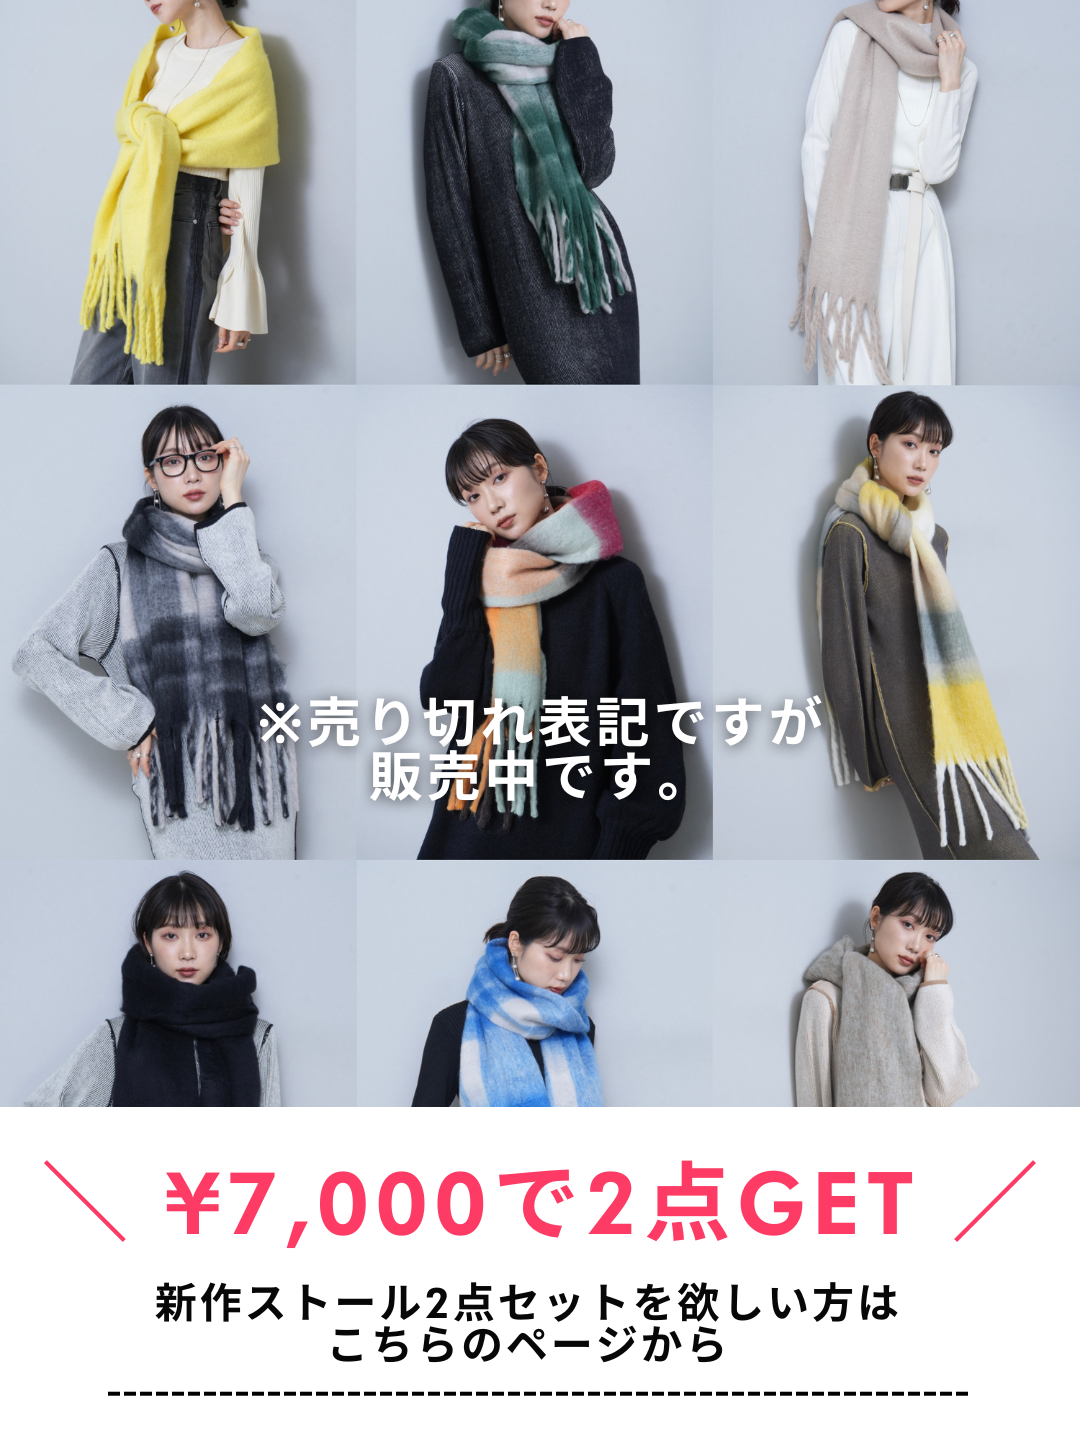 [Choose from 6 styles and 24 colors!] New 2-piece scarf set for 7,000 yen!